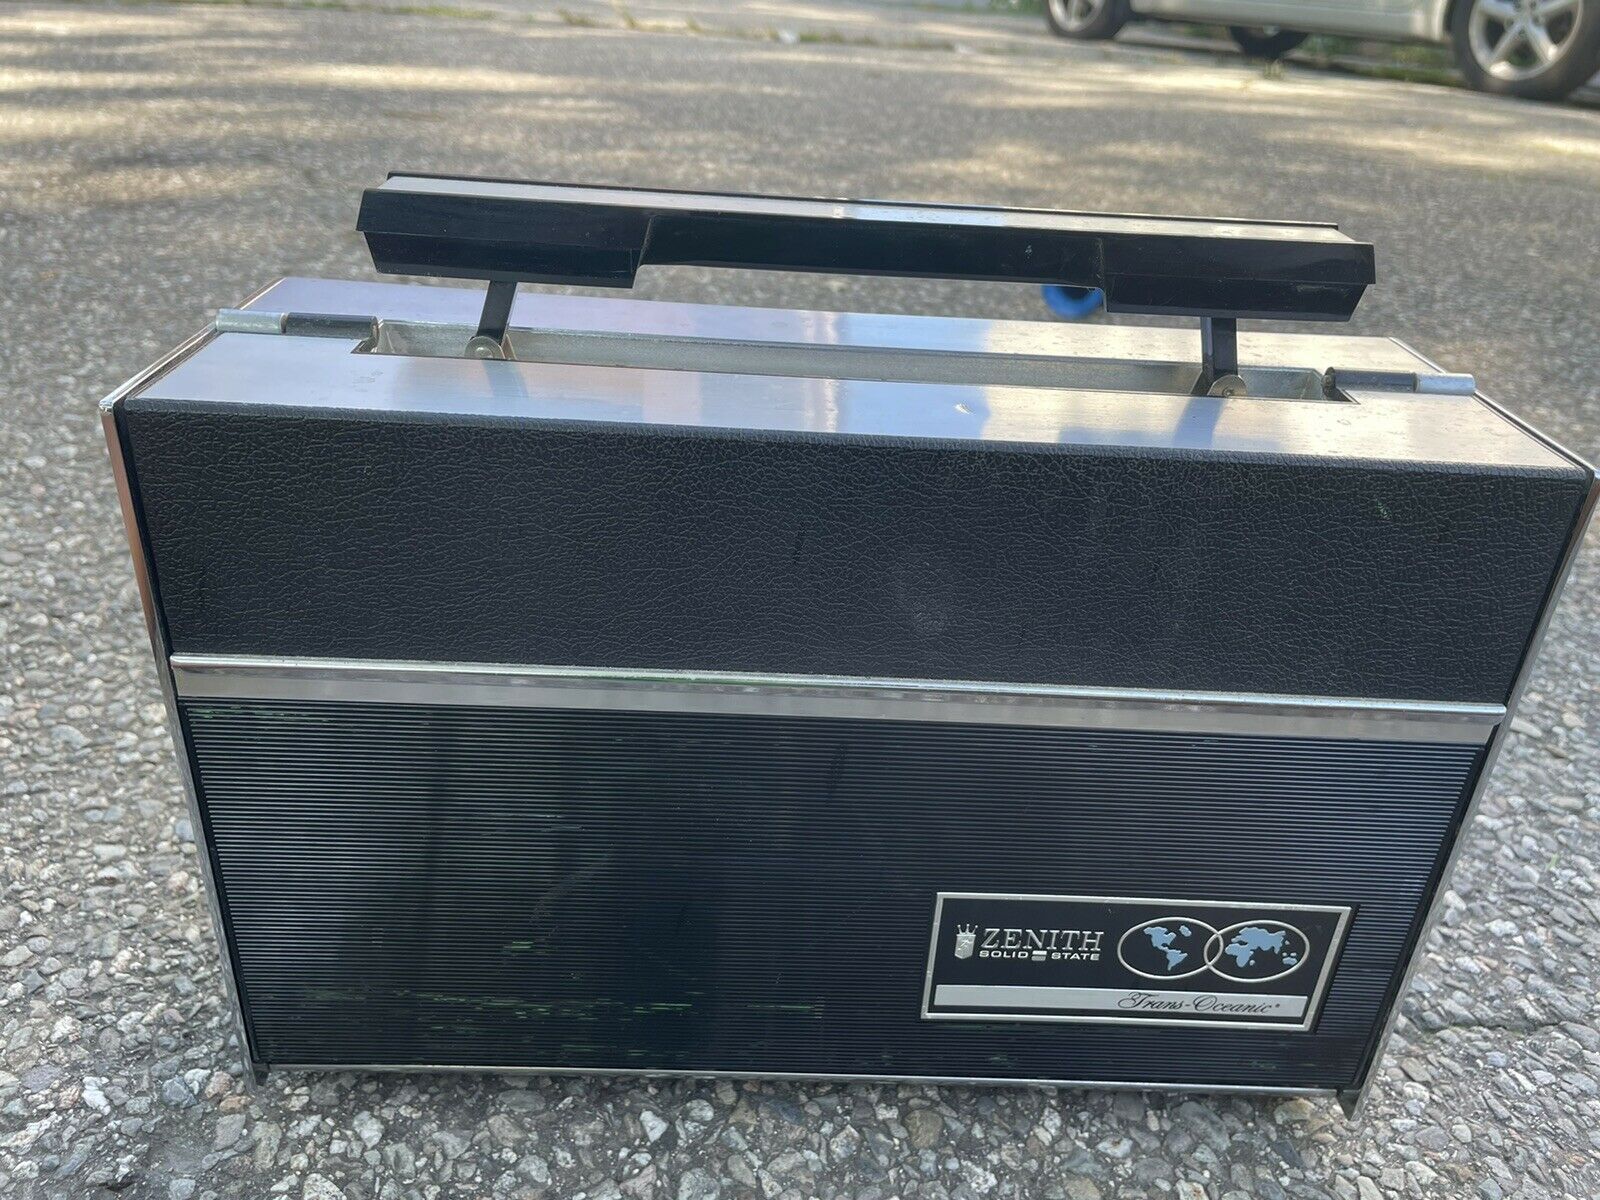 Vintage Zenith Solid State Trans Oceanic Royal 7000 Radio